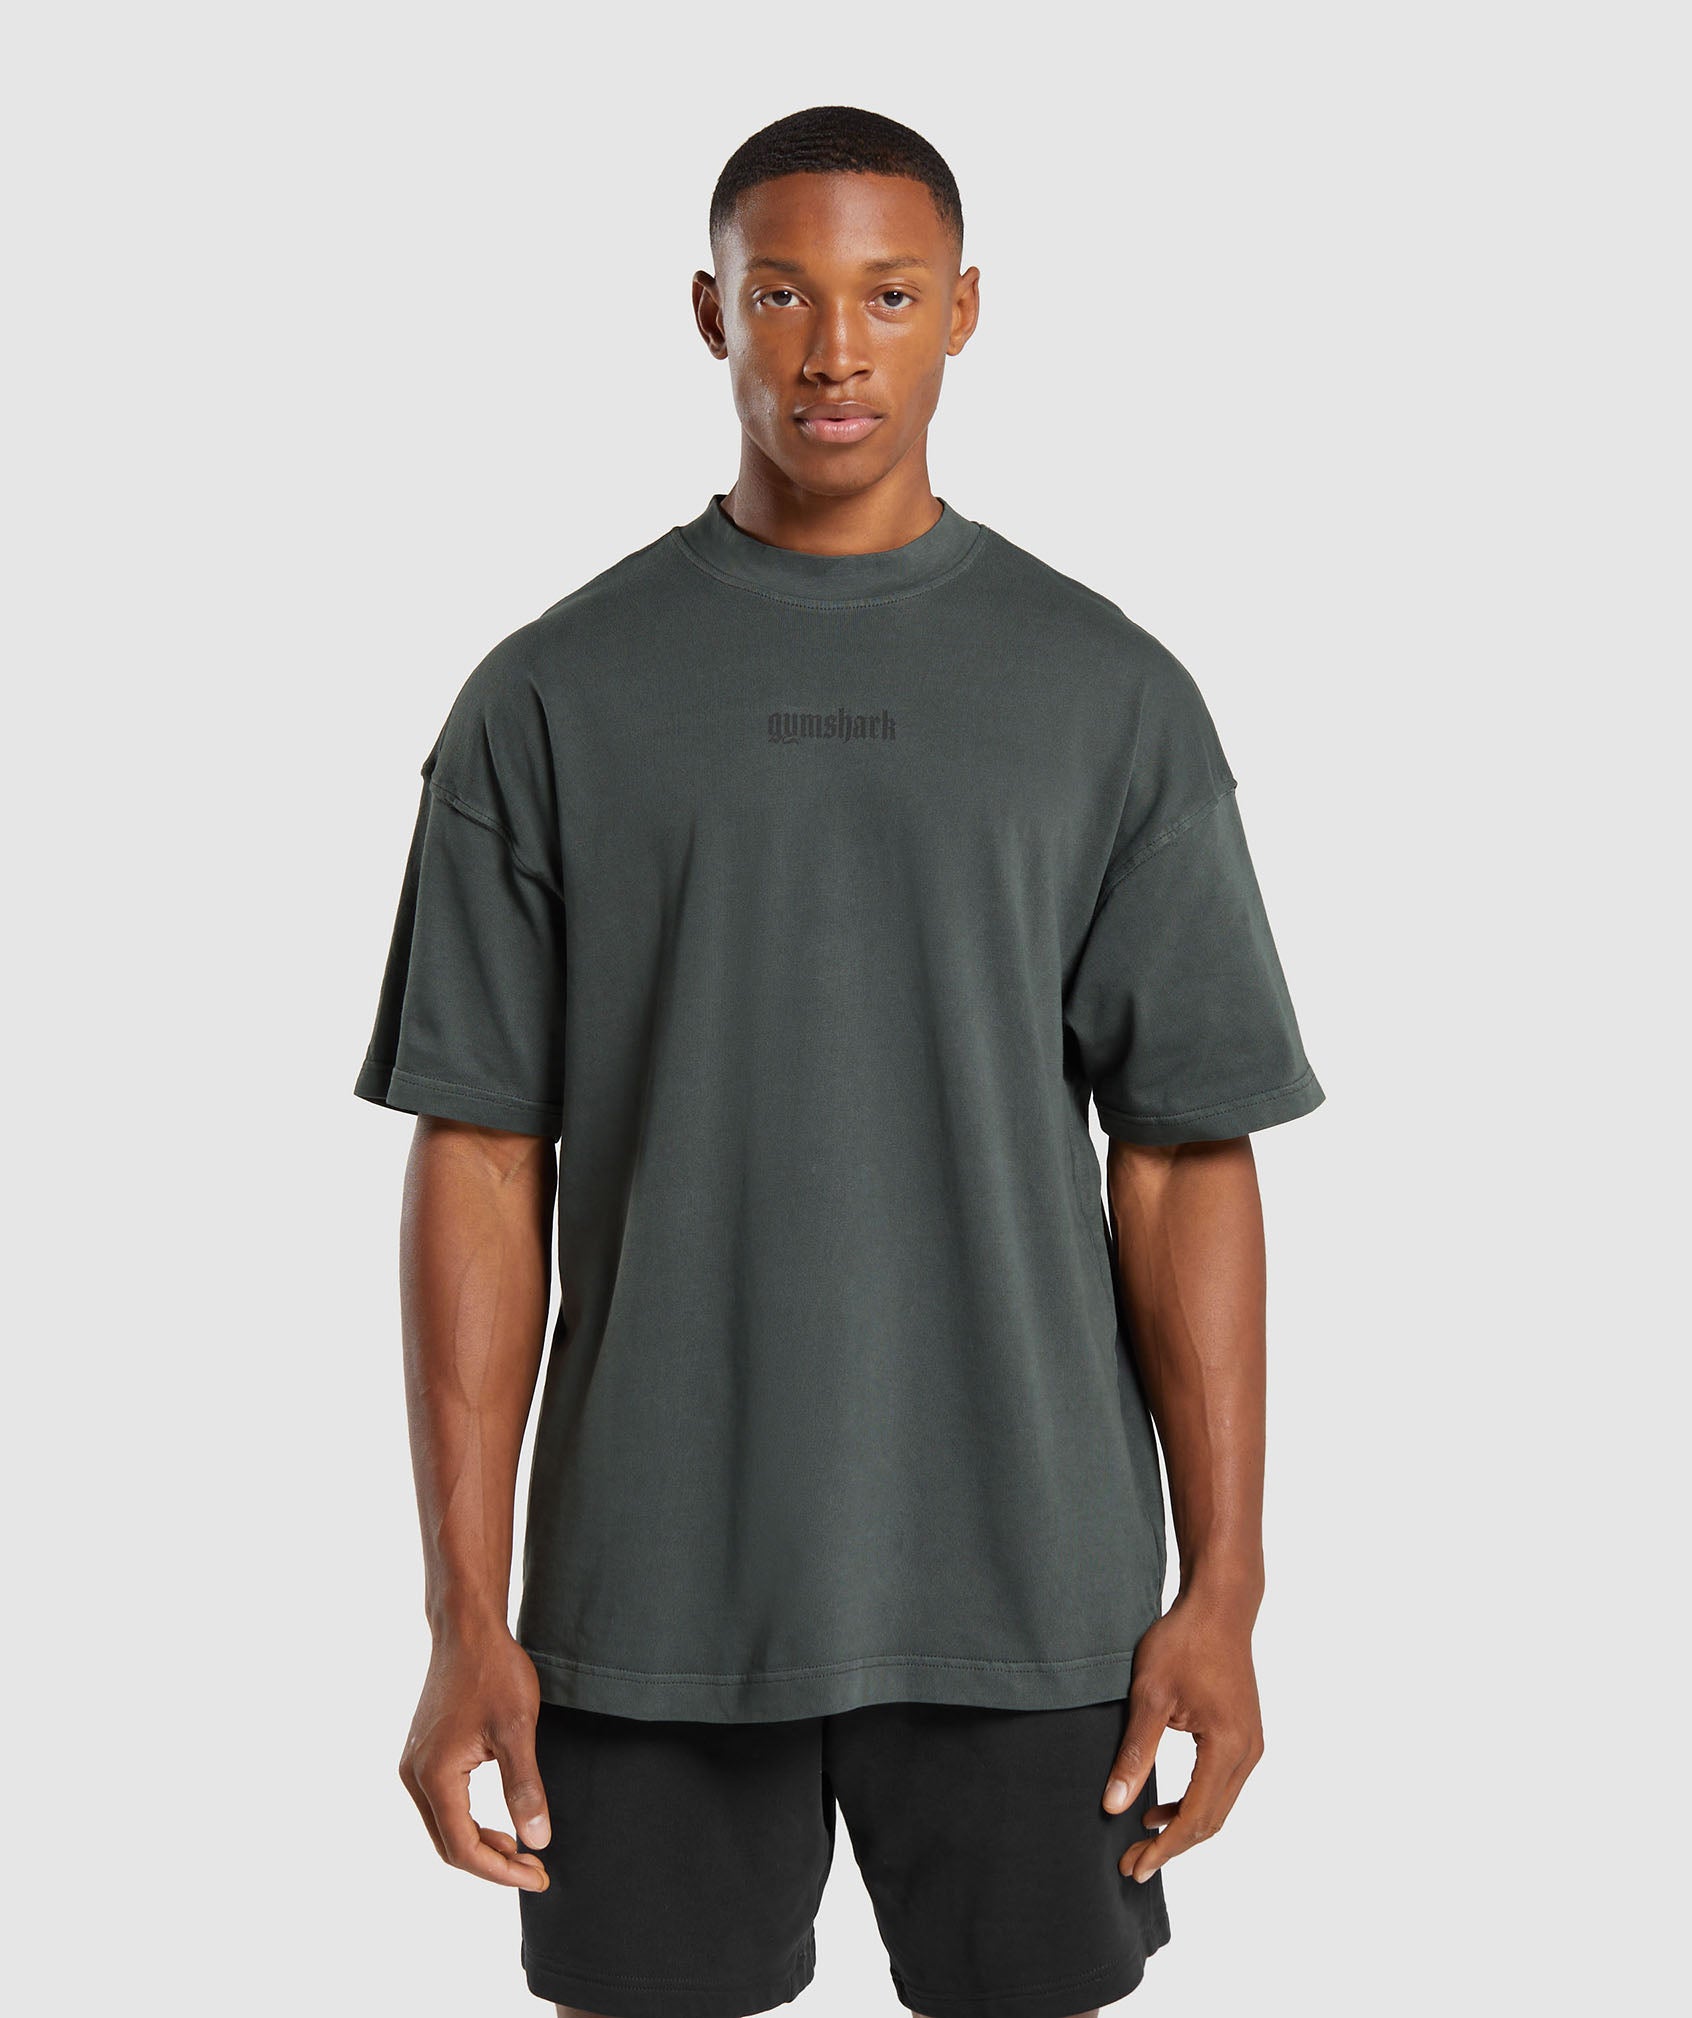 Heavyweight T-Shirt in Deep Olive Green - view 1